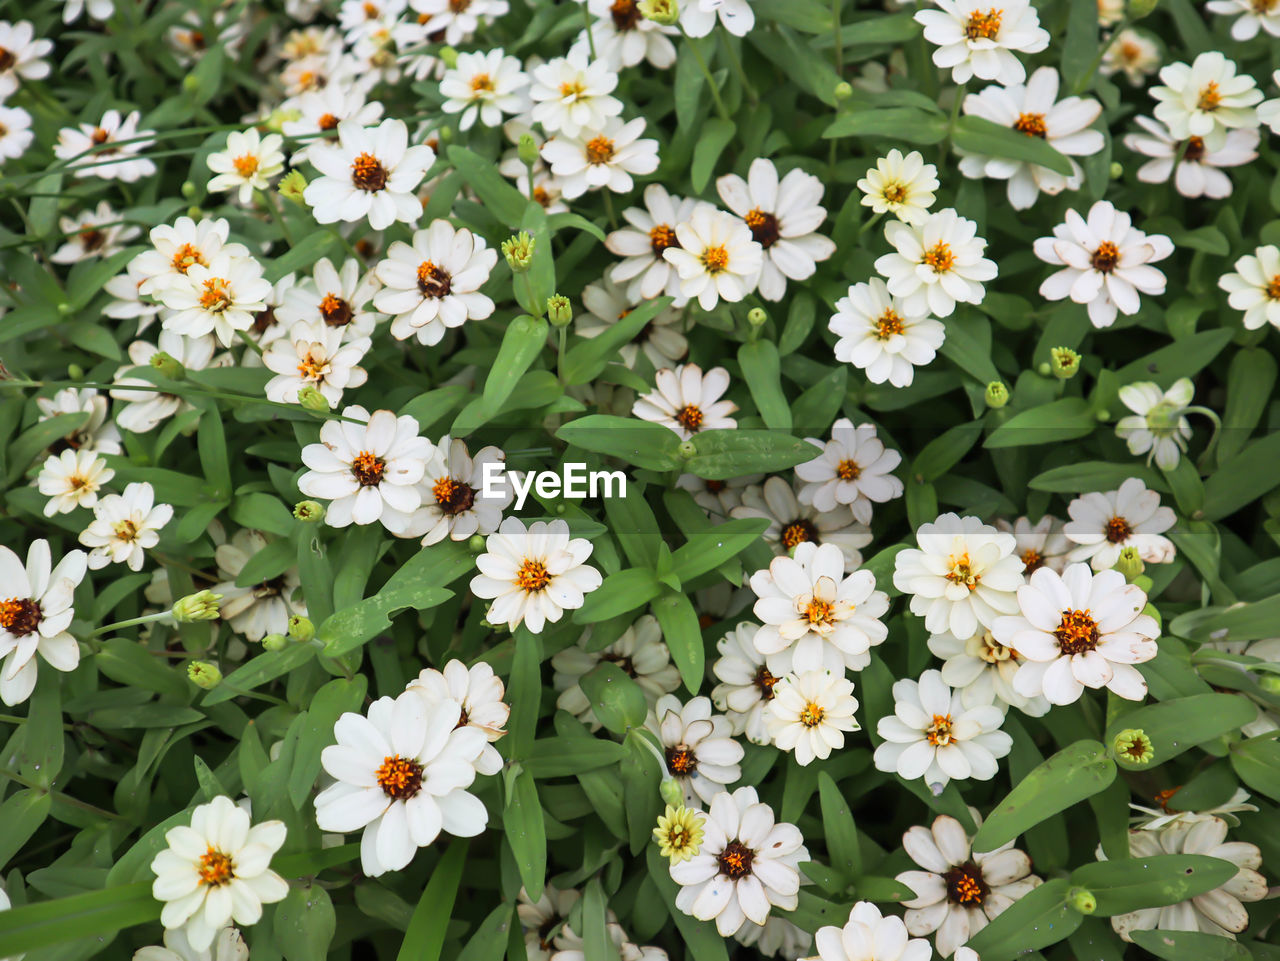 HIGH ANGLE VIEW OF WHITE FLOWERING PLANT IN PARK